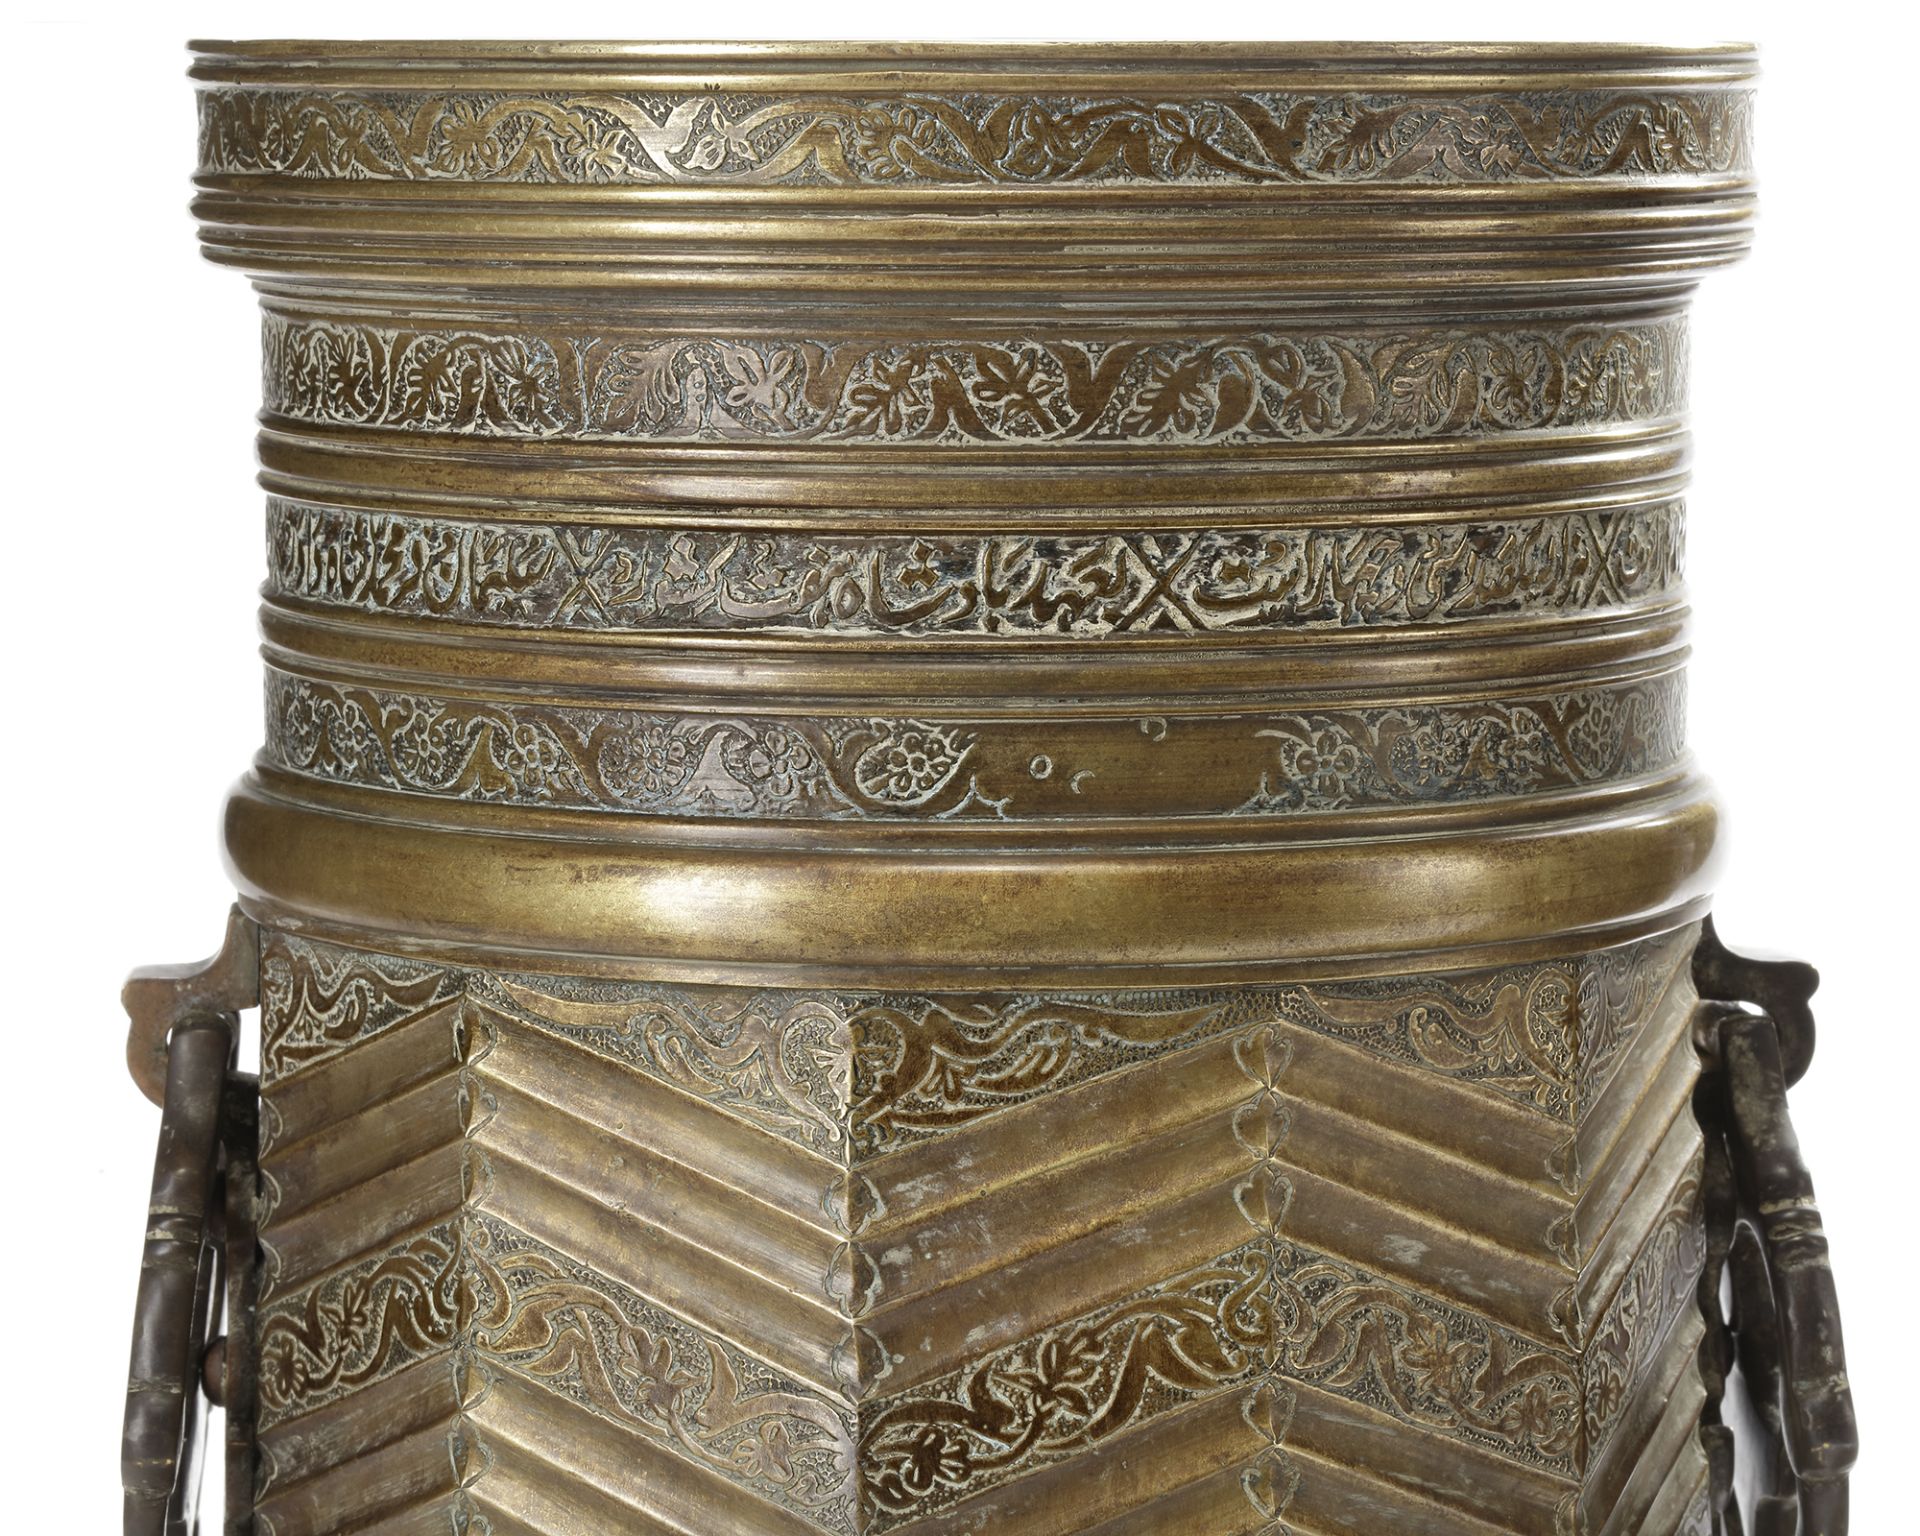 A PAIR LARGE OF SAFAVID STYLE ENGRAVED BRASS TORCH STANDS, PERSIA, 18TH -19TH CENTURY - Bild 5 aus 6